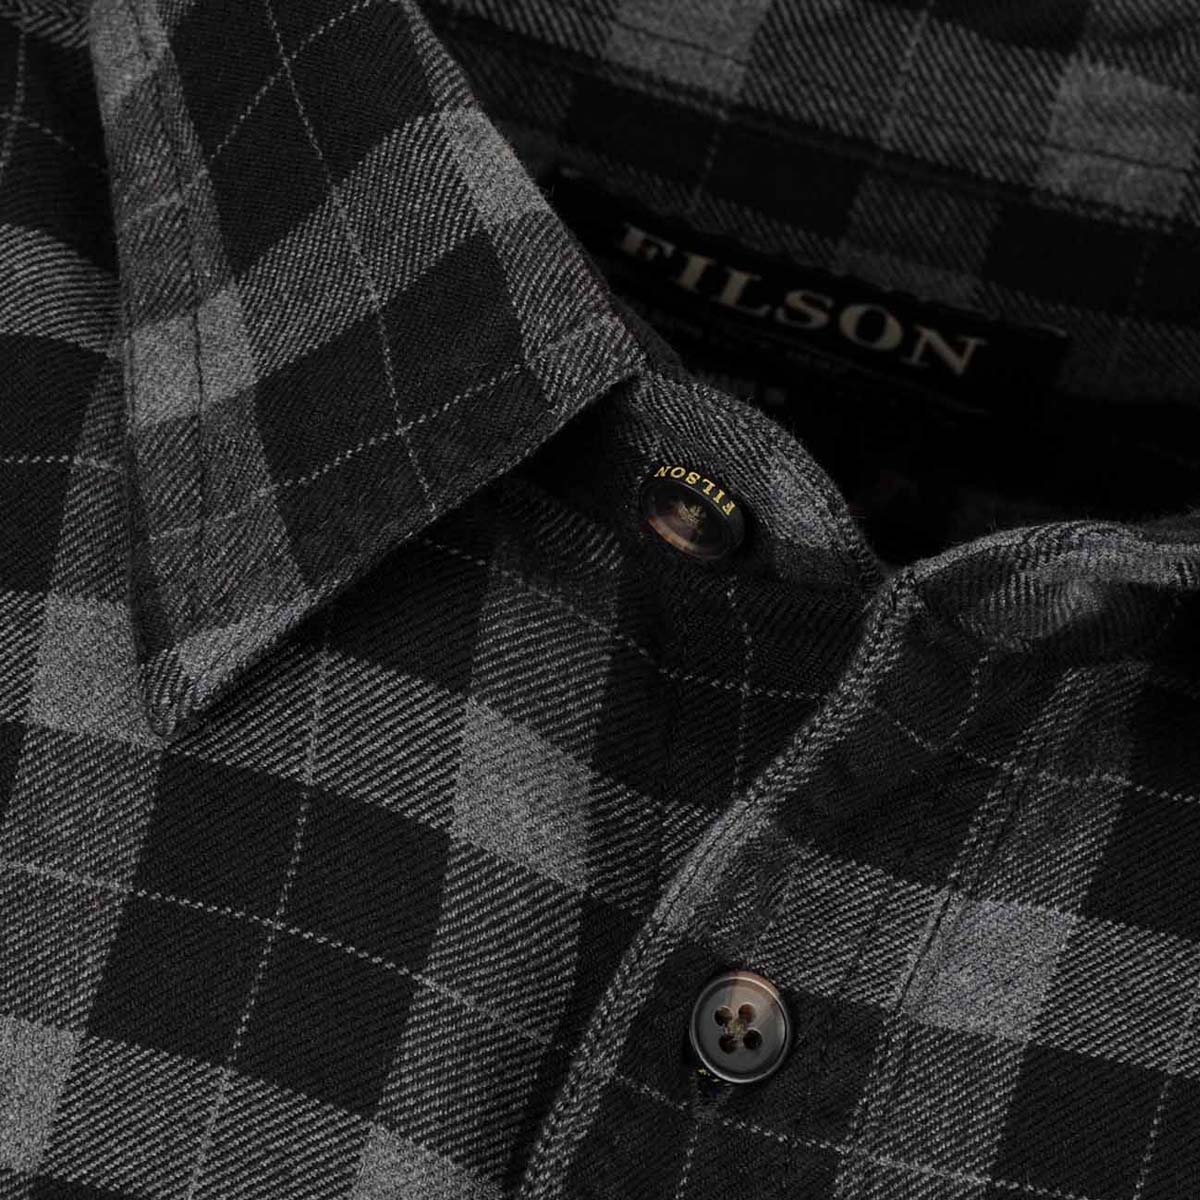 Filson Alaskan Guide Shirt Heather Gray/Black Plaid, this iconic, breathable flannel shirt has a pleated back for freedom of movement